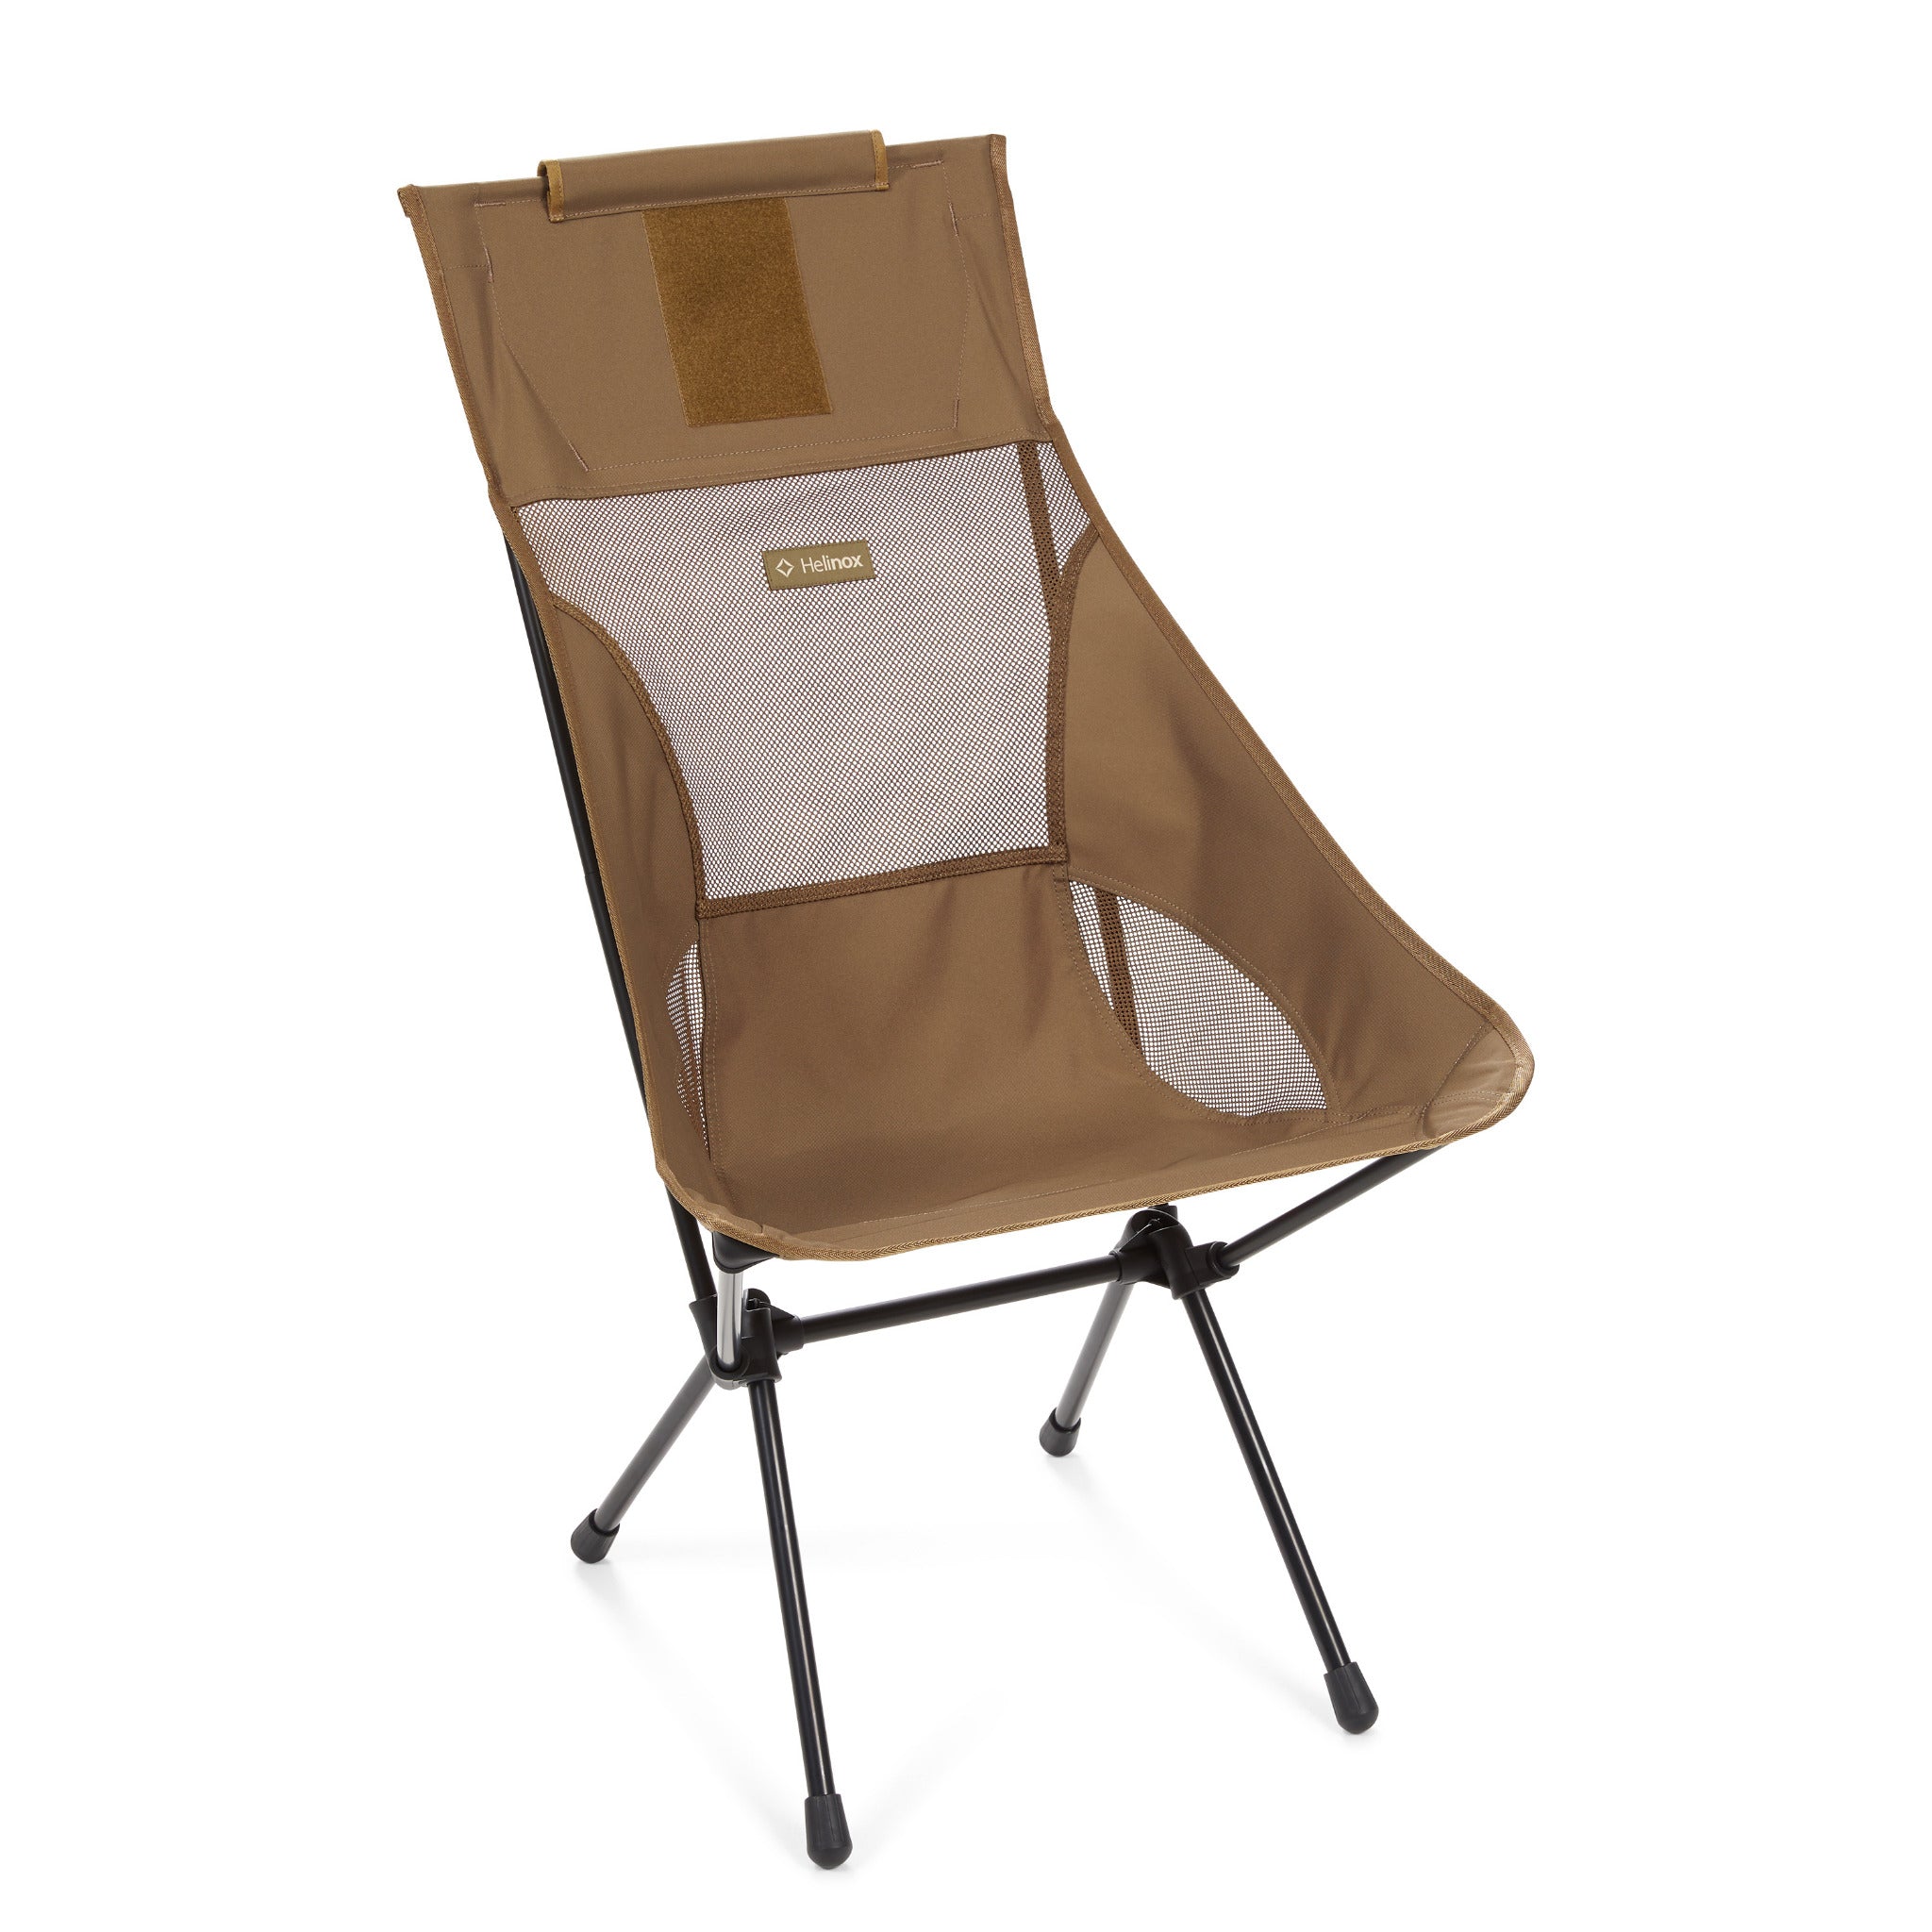 Helinox Sunset Chair Free Shipping And 5 Year Warranty 